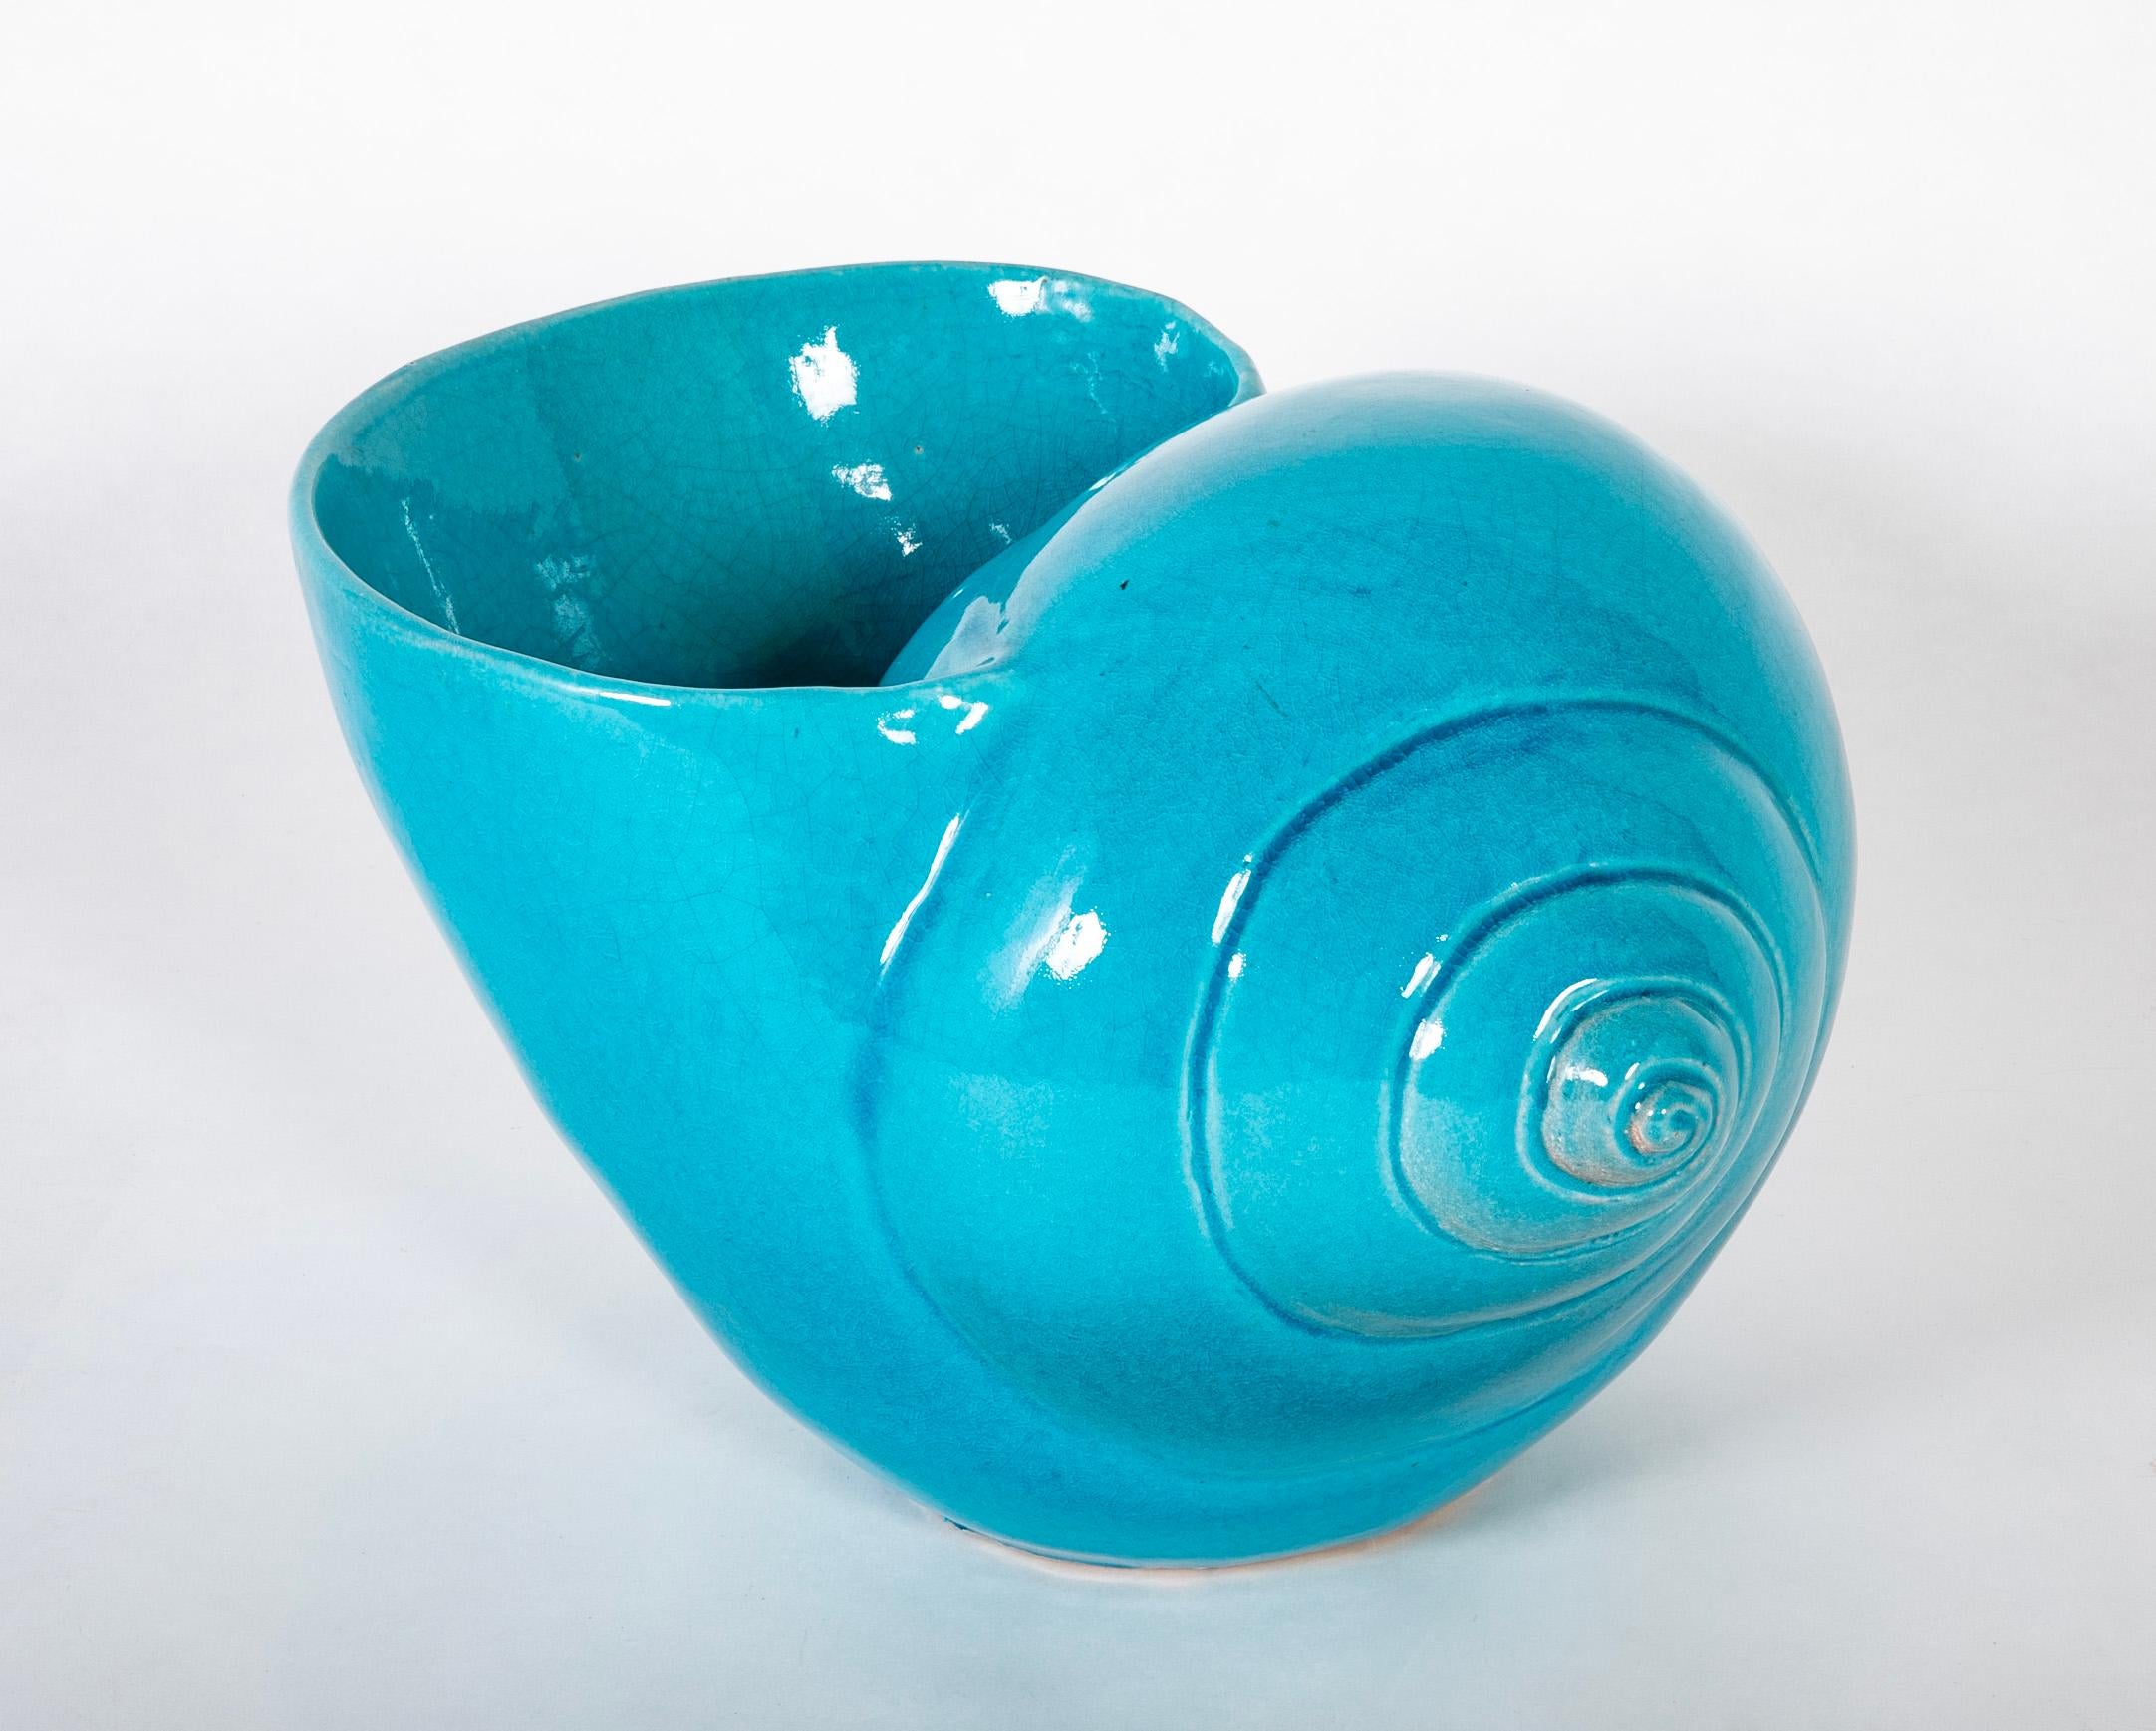 Mid-Century Modern Turquoise Blue Glazed Sea Shell Vase Jardiniere Planter, Large Scale For Sale